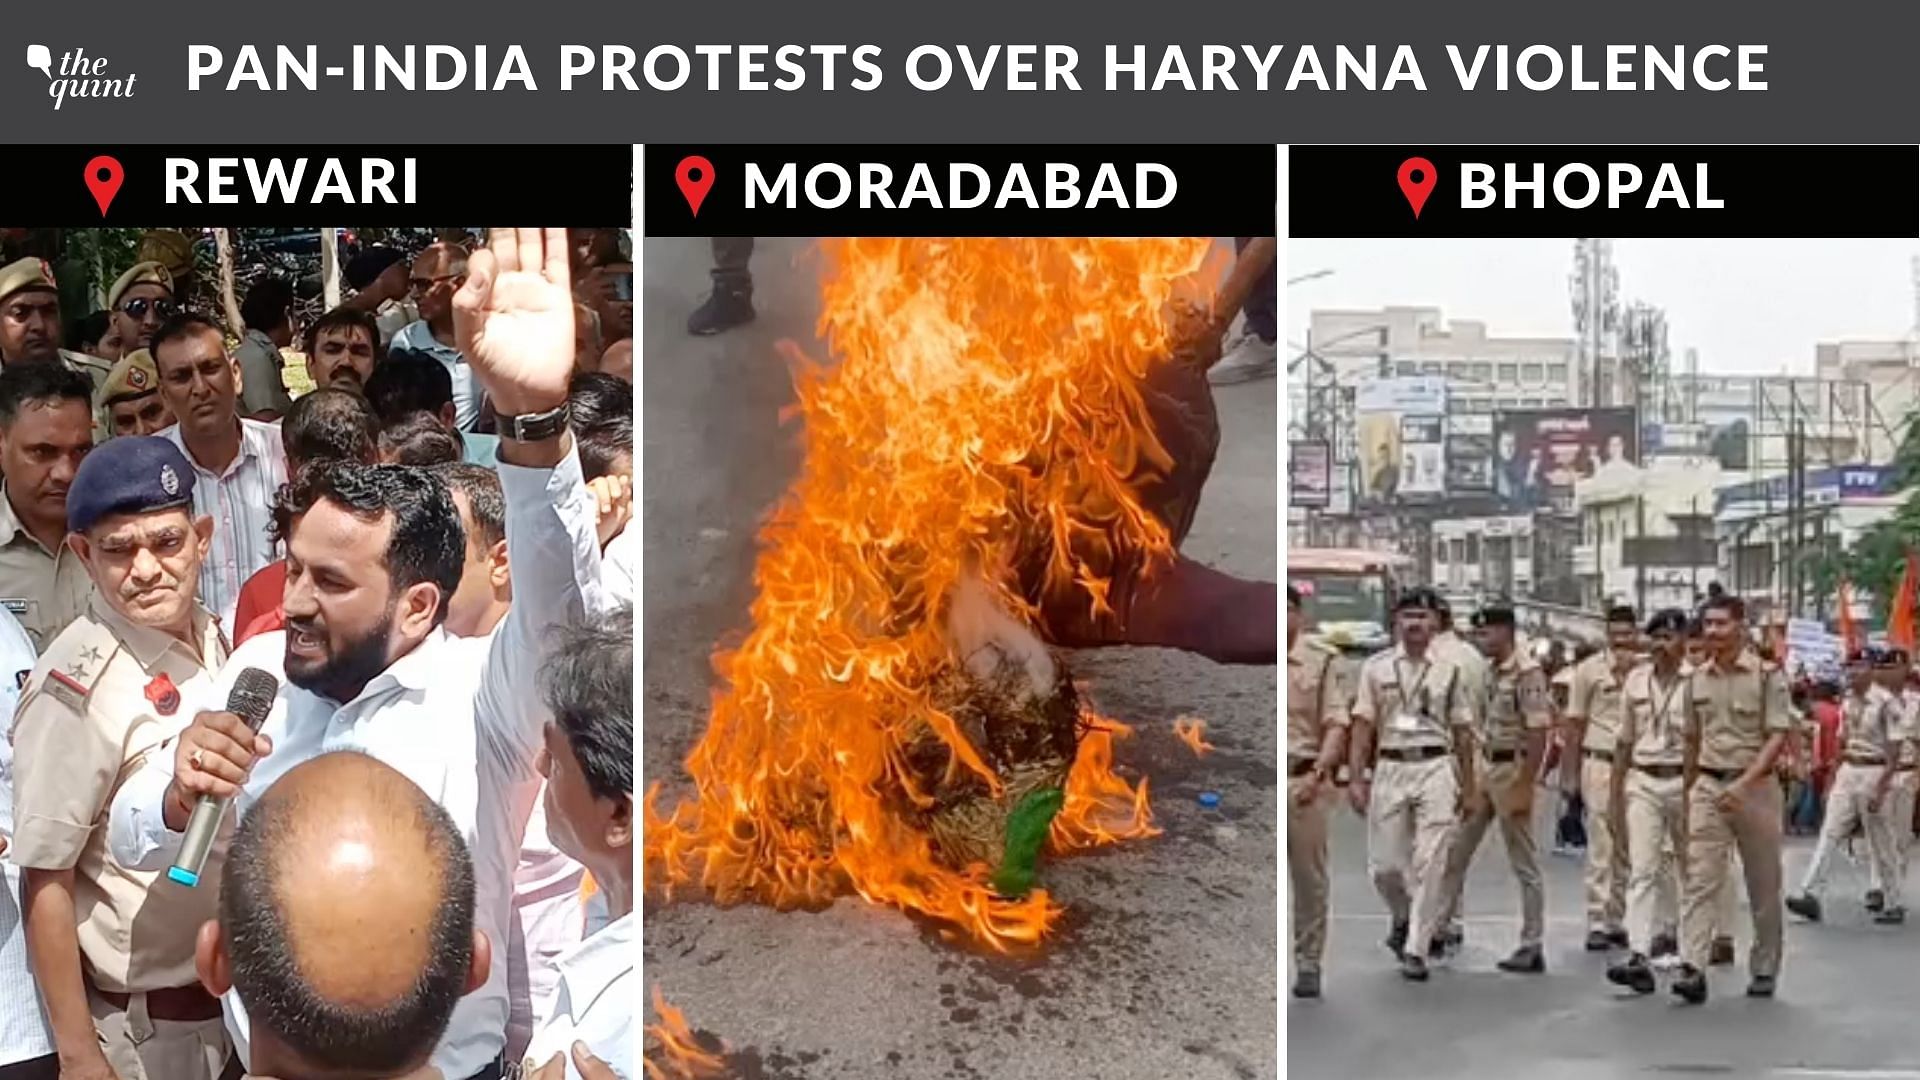 <div class="paragraphs"><p>'Khattar Must Act': Pan-India Protests by VHP, Bajrang Dal Over Haryana Violence</p></div>